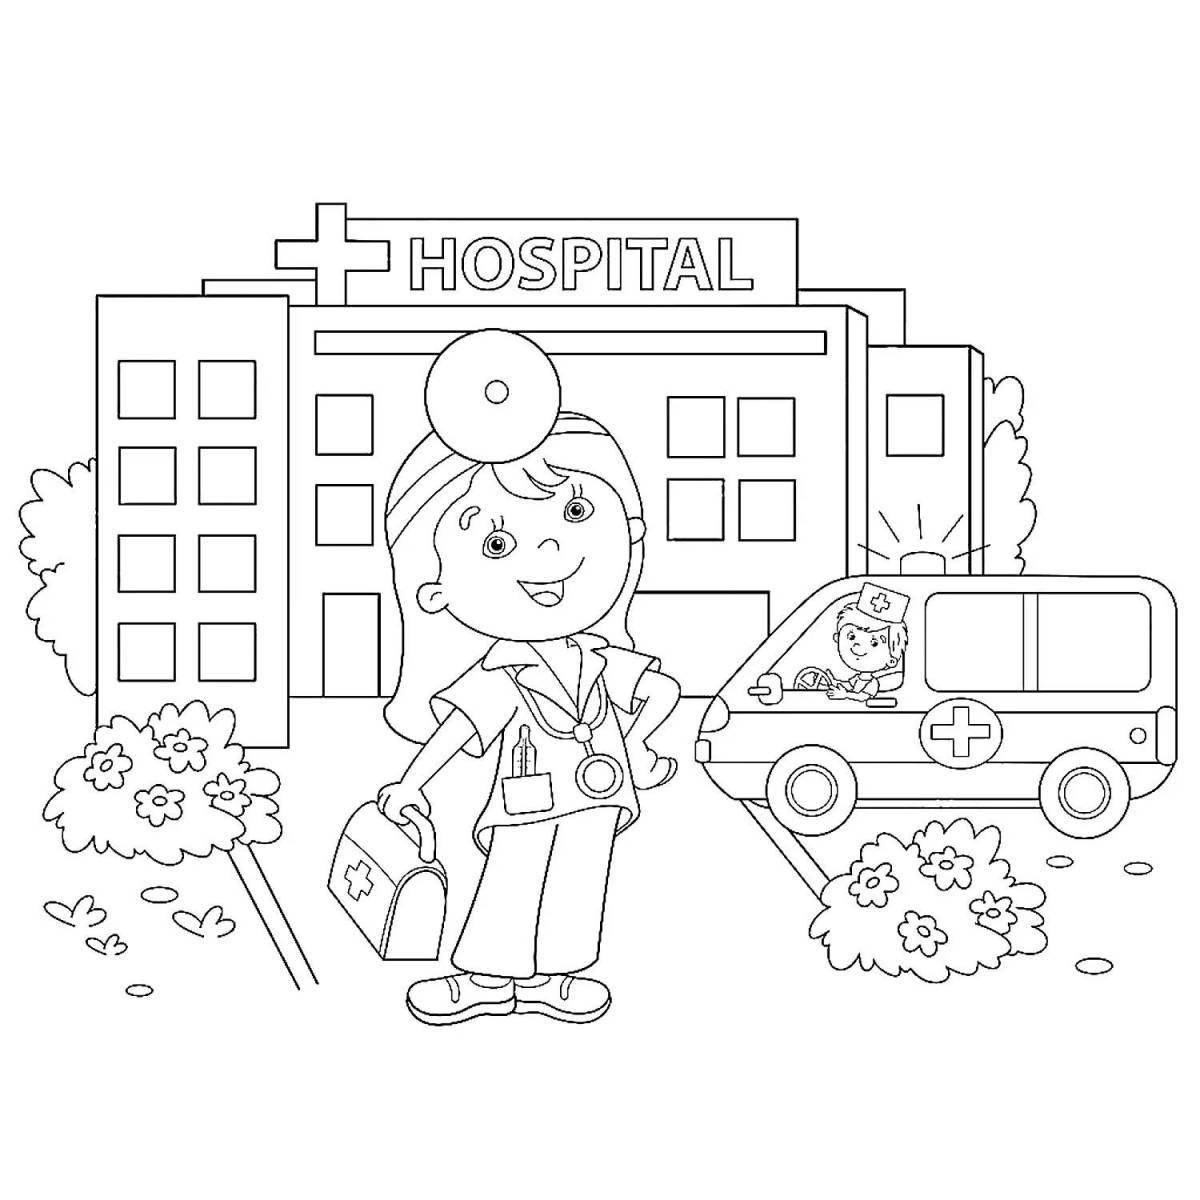 Creative hospital coloring book for kids